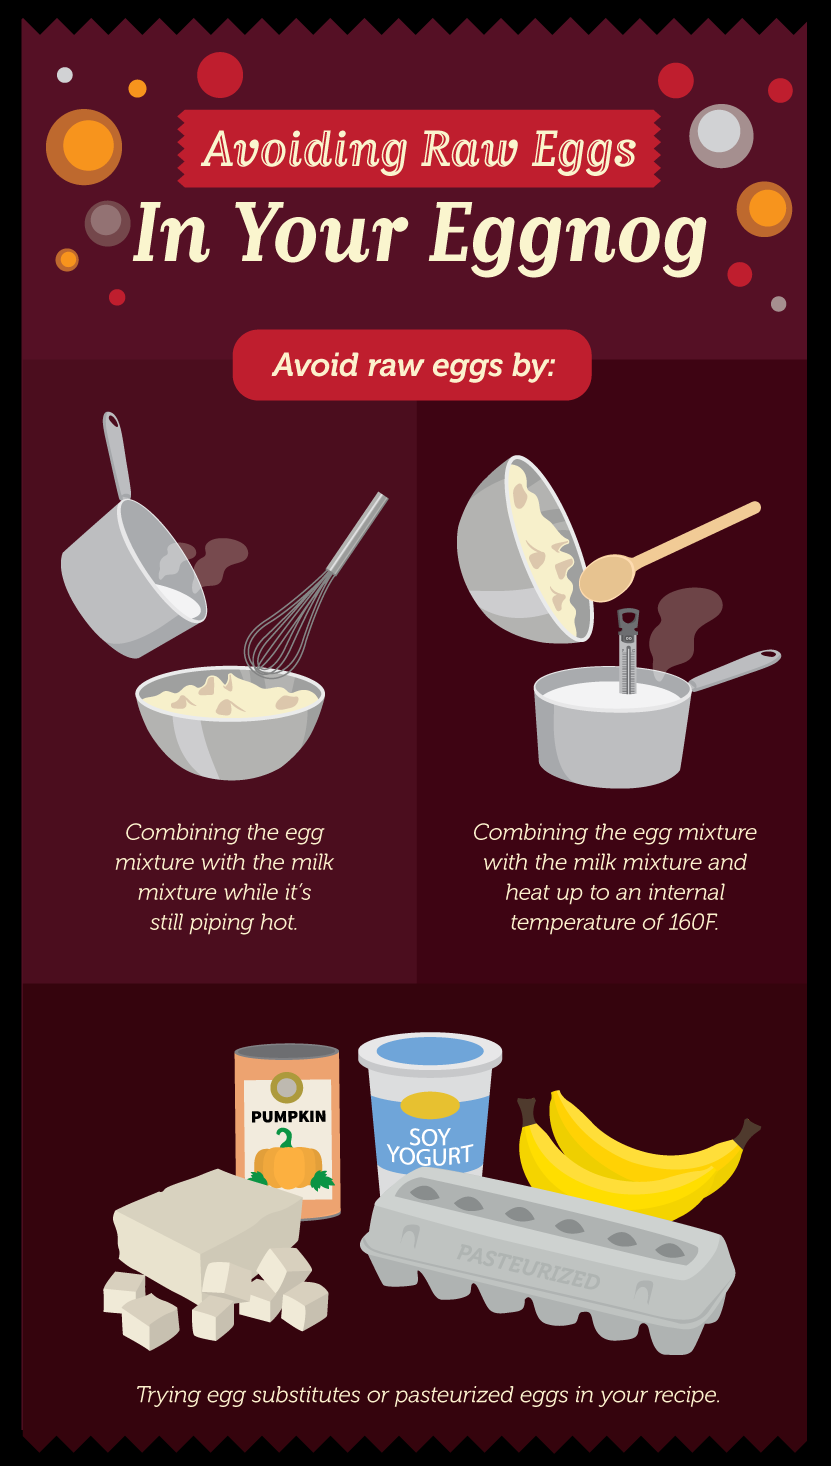 Avoiding Raw Eggs in Eggnog - Irresistible Eggnog Recipes for the Holidays